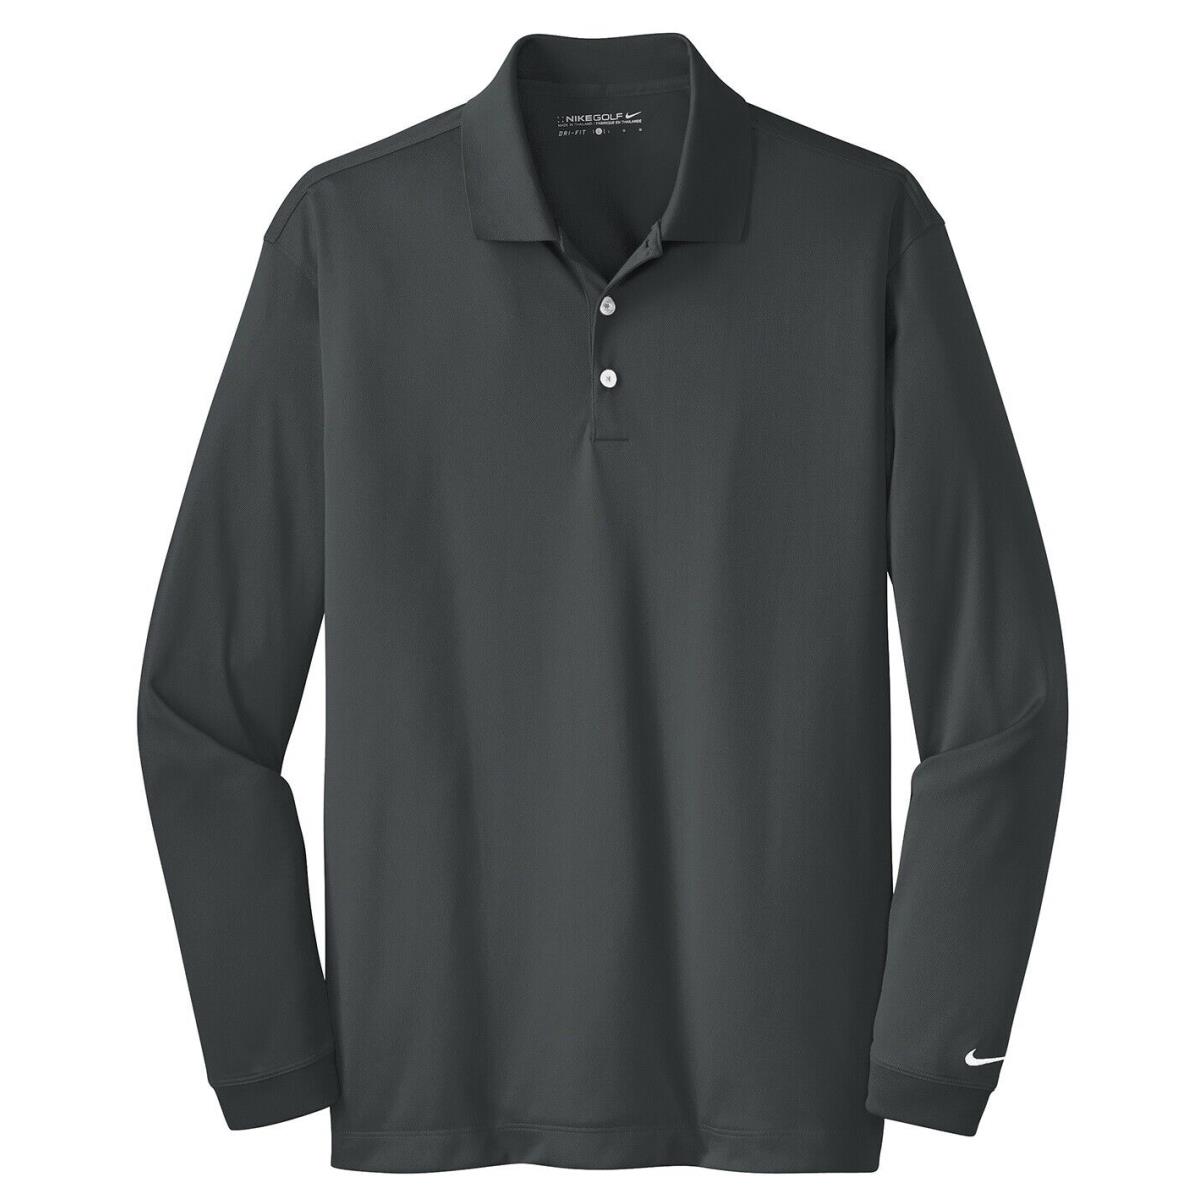 Men`s Nike Golf Long Sleeve Dri-fit Polo Shirt Side Vents Tall LT - 4XLT Anthracite Grey